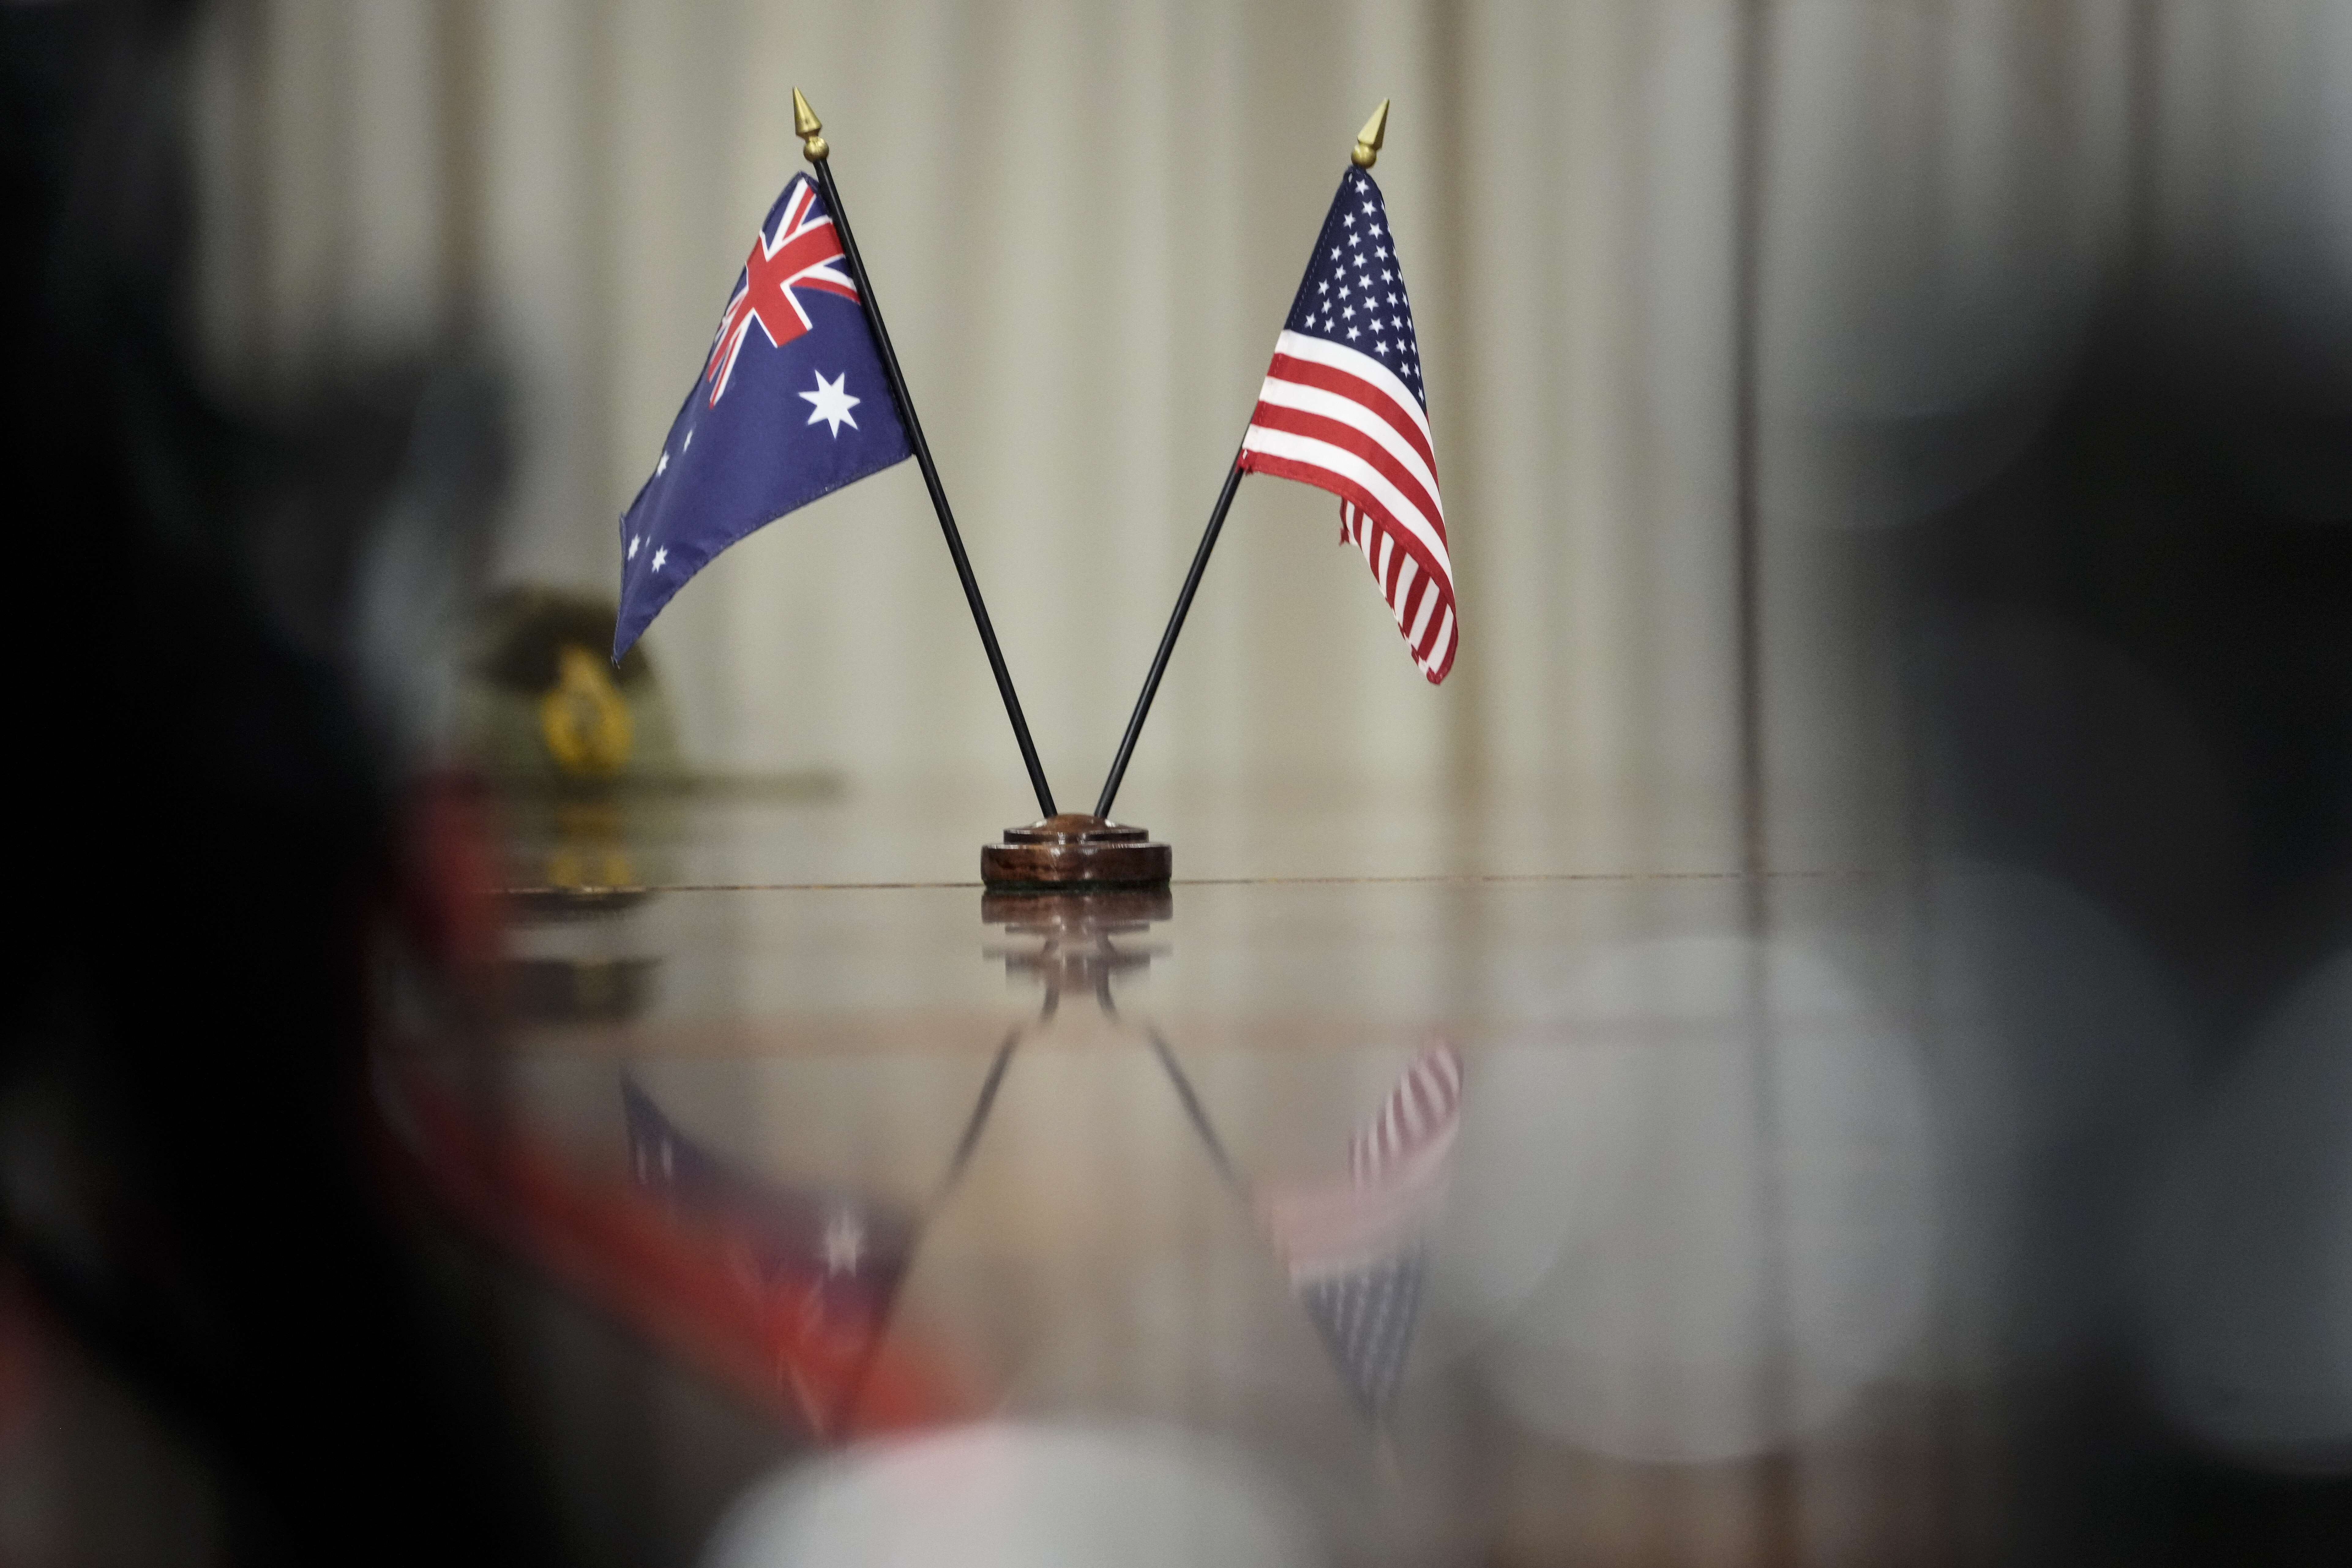 A deal giving Australia access to American nuclear expertise has antagonised several countries, including the US’ own allies. Photo: AFP